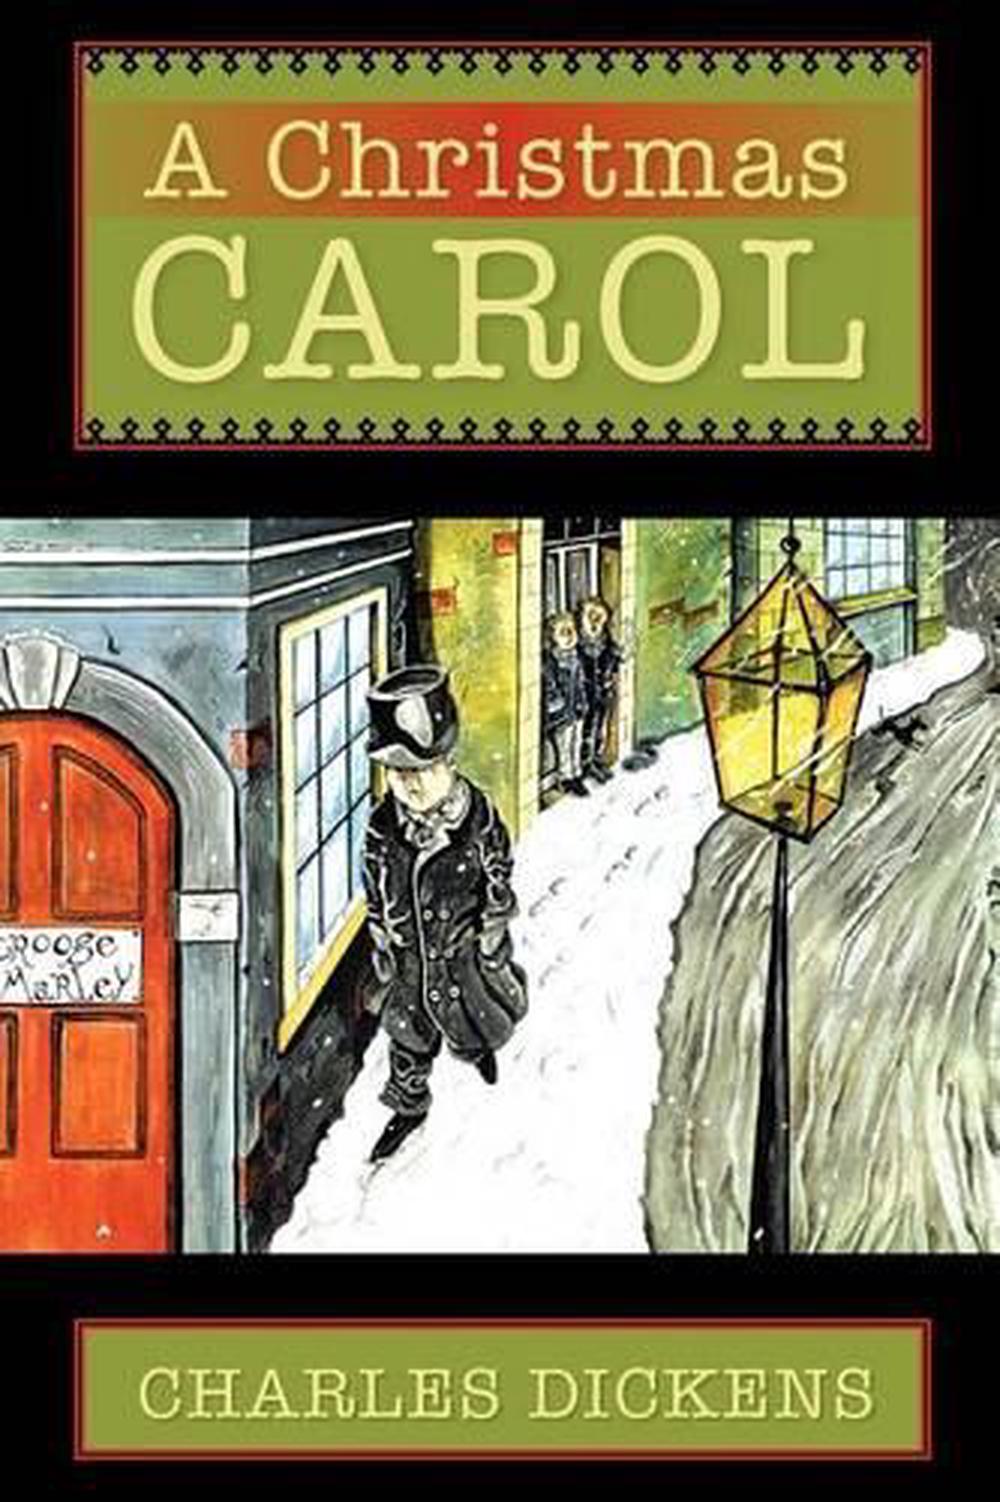 A Christmas Carol by Charles Dickens (English) Paperback Book Free